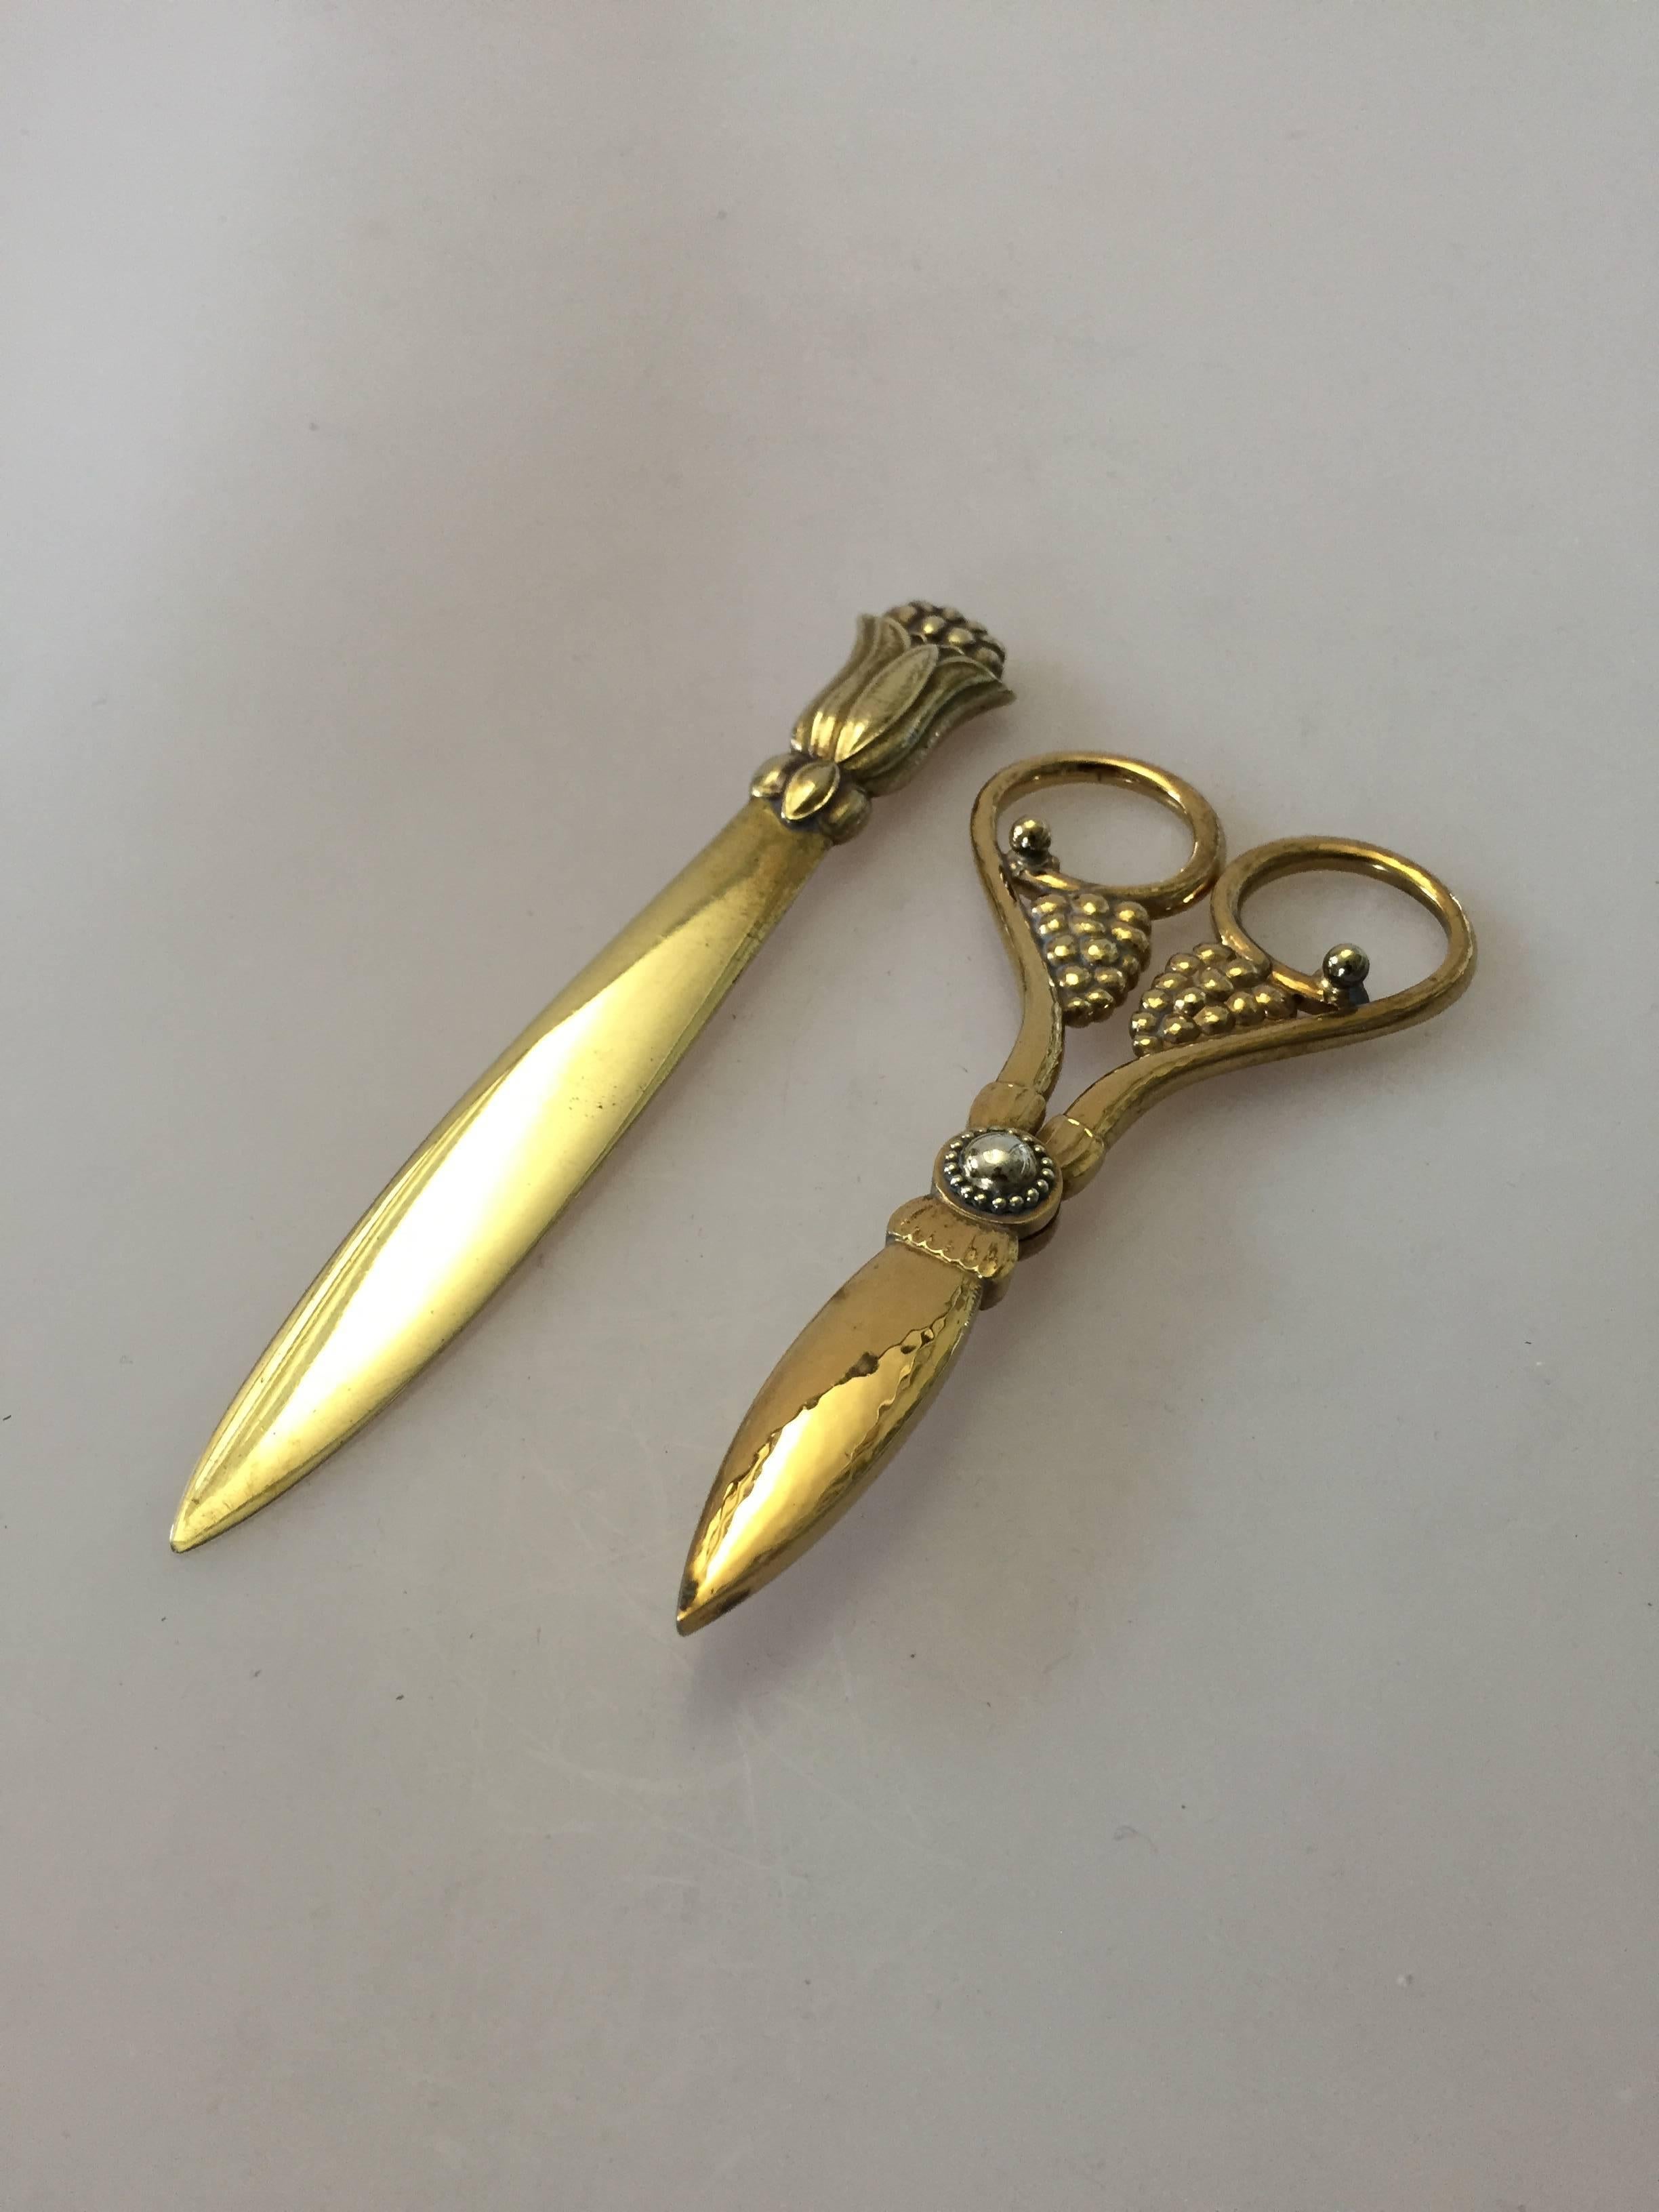 Georg Jensen copper grape scissor and letter knife.

A beautiful pair of scissor and letter knife made in copper. Done by employee at Georg Jensen. 

Knife measures 15.6 cm / 6 9/64